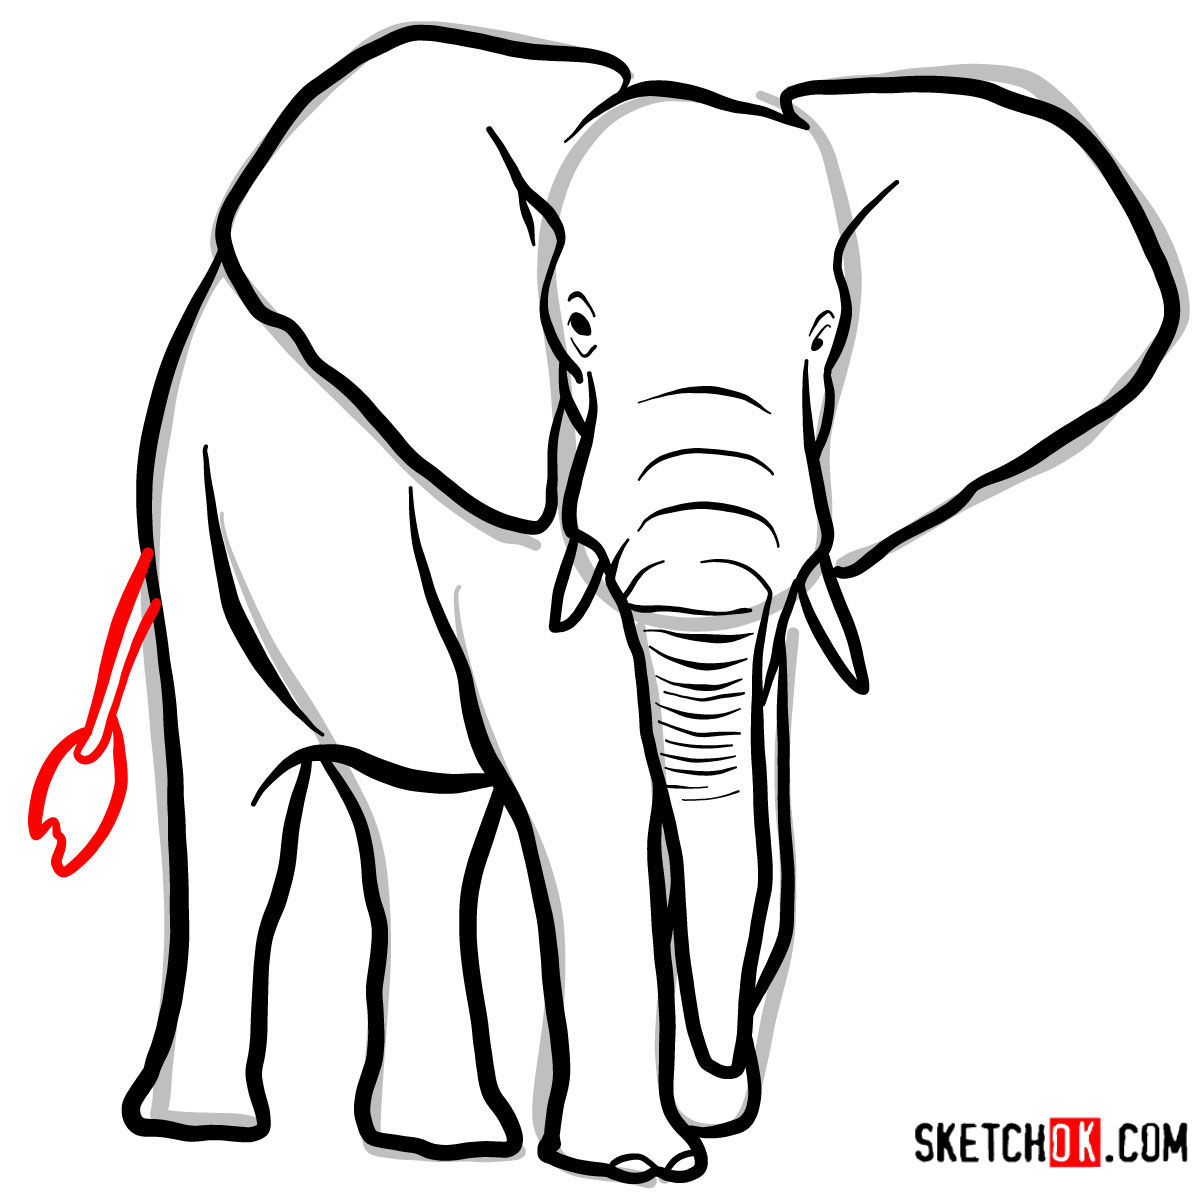 How To Sketch An Elephant, African Elephant, Step by Step, Drawing Guide,  by finalprodigy - DragoArt